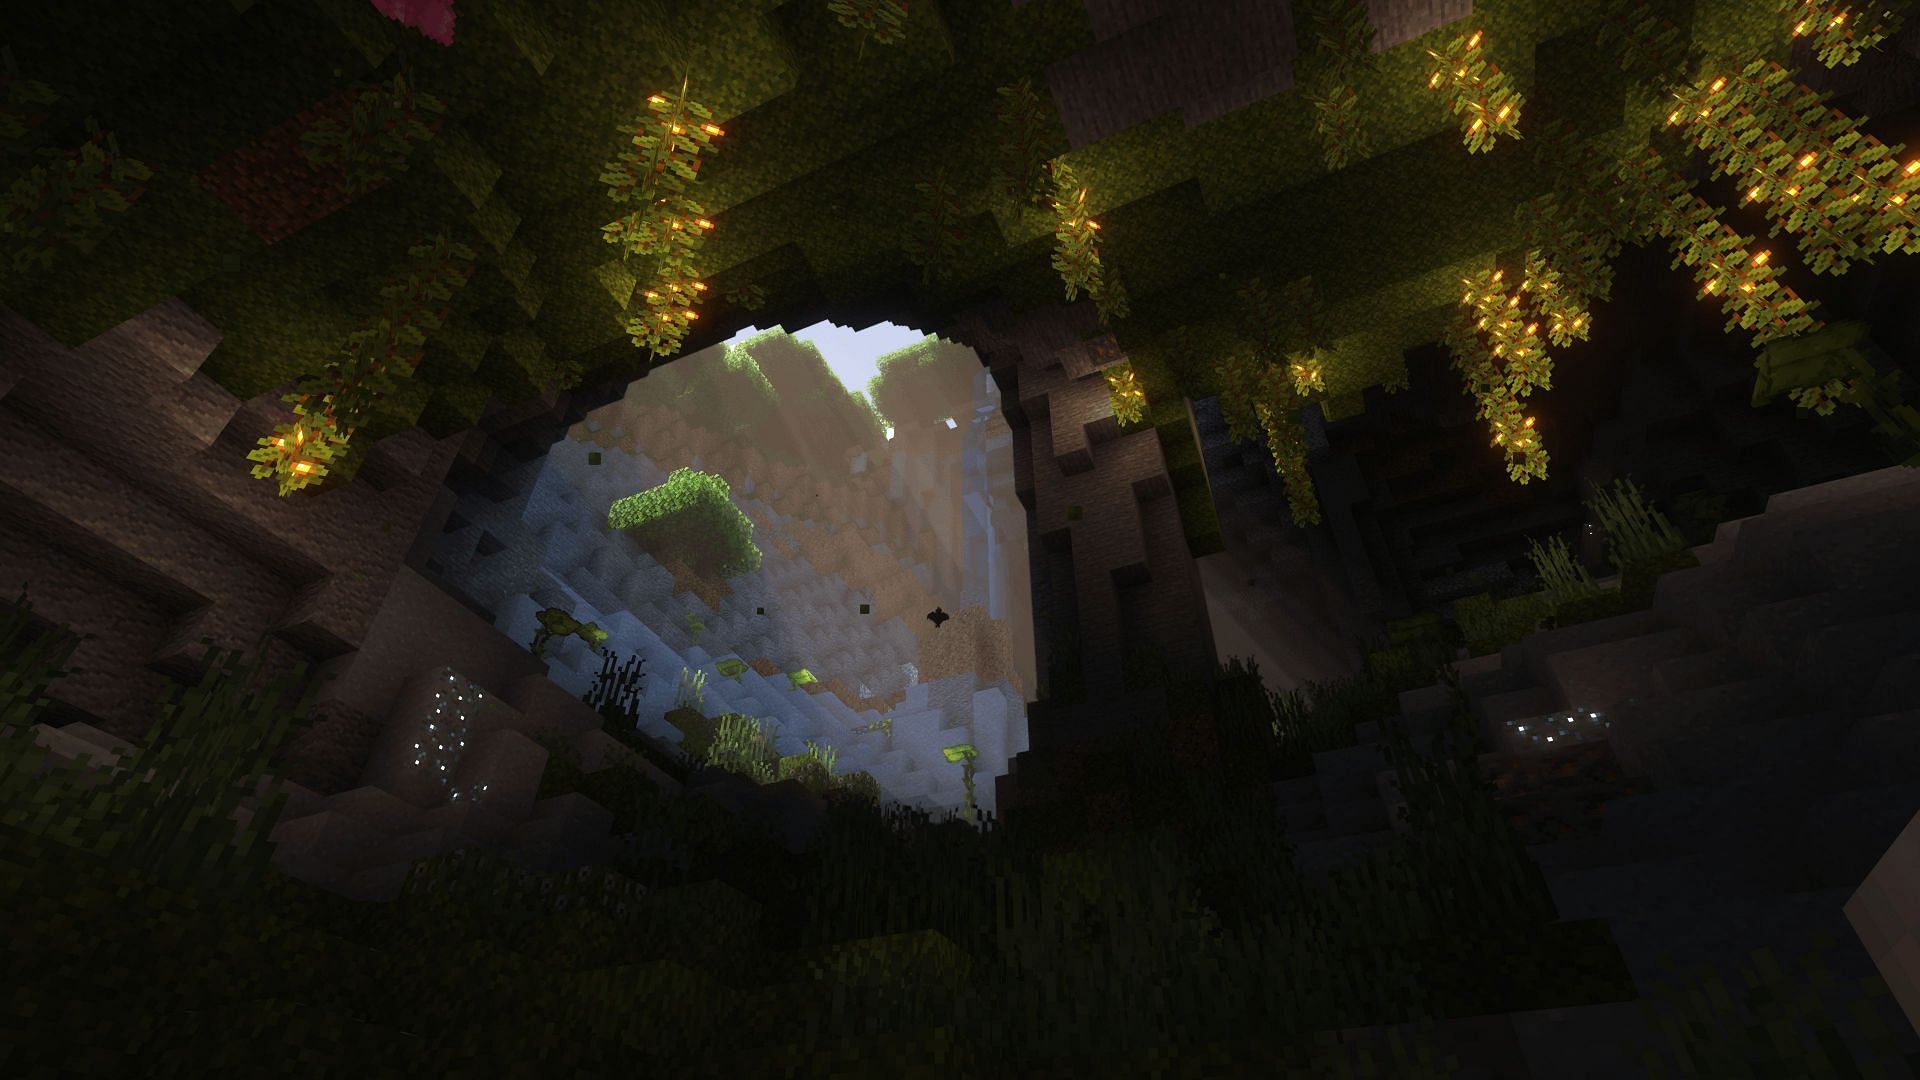 The lush cave that the artist used as inspiration (Image via u/RADI0R in r/minecraft)